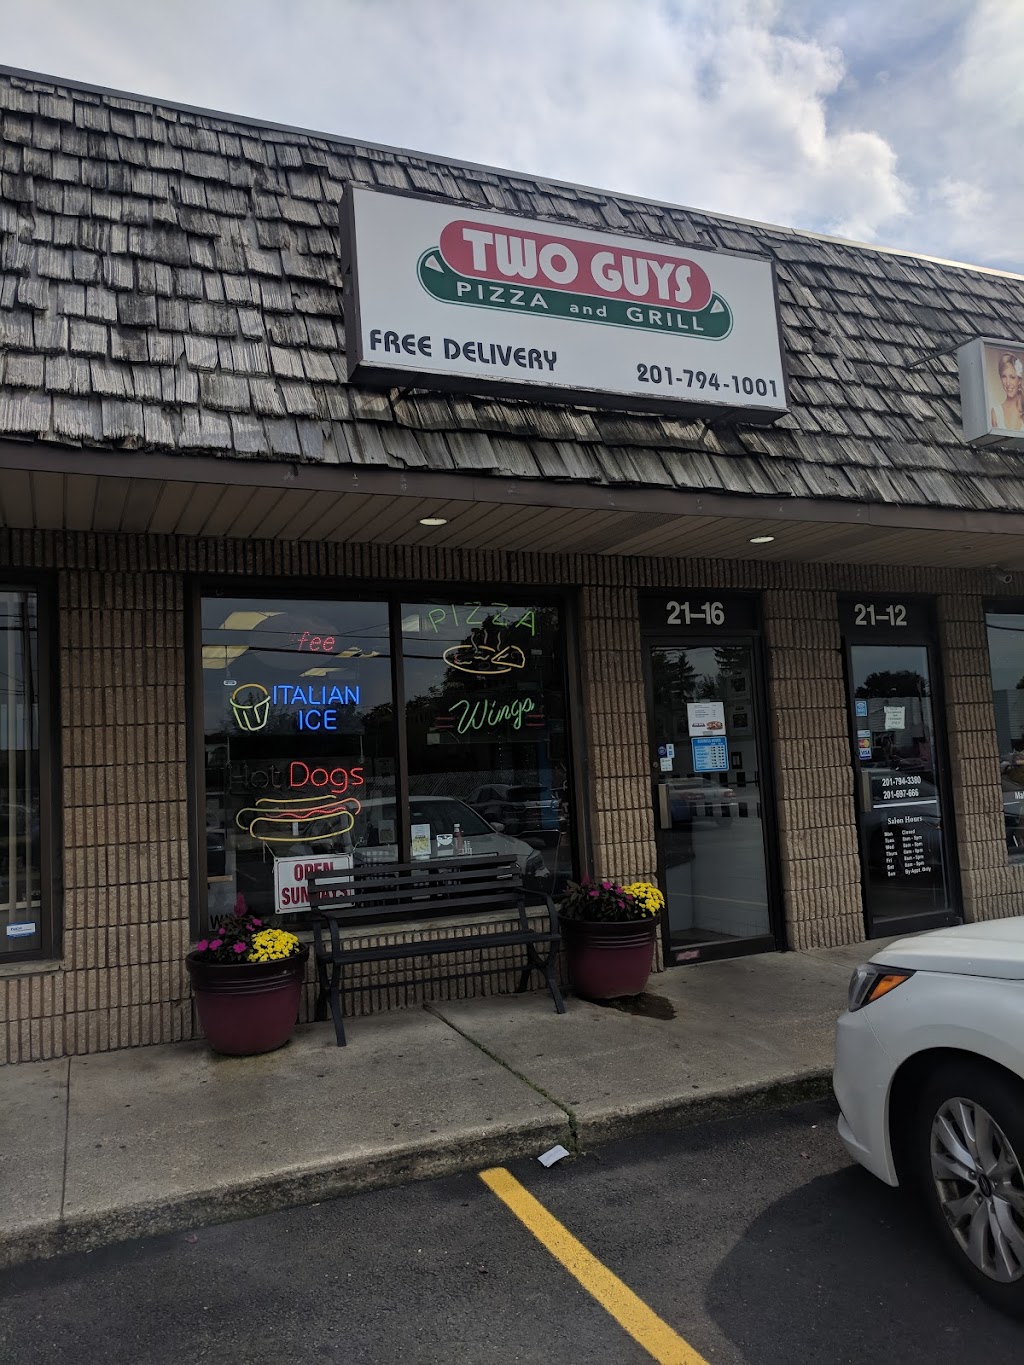 Two Guys Pizza & Grille | 21-16, 3120, Morlot Ave, Fair Lawn, NJ 07410 | Phone: (201) 794-1001